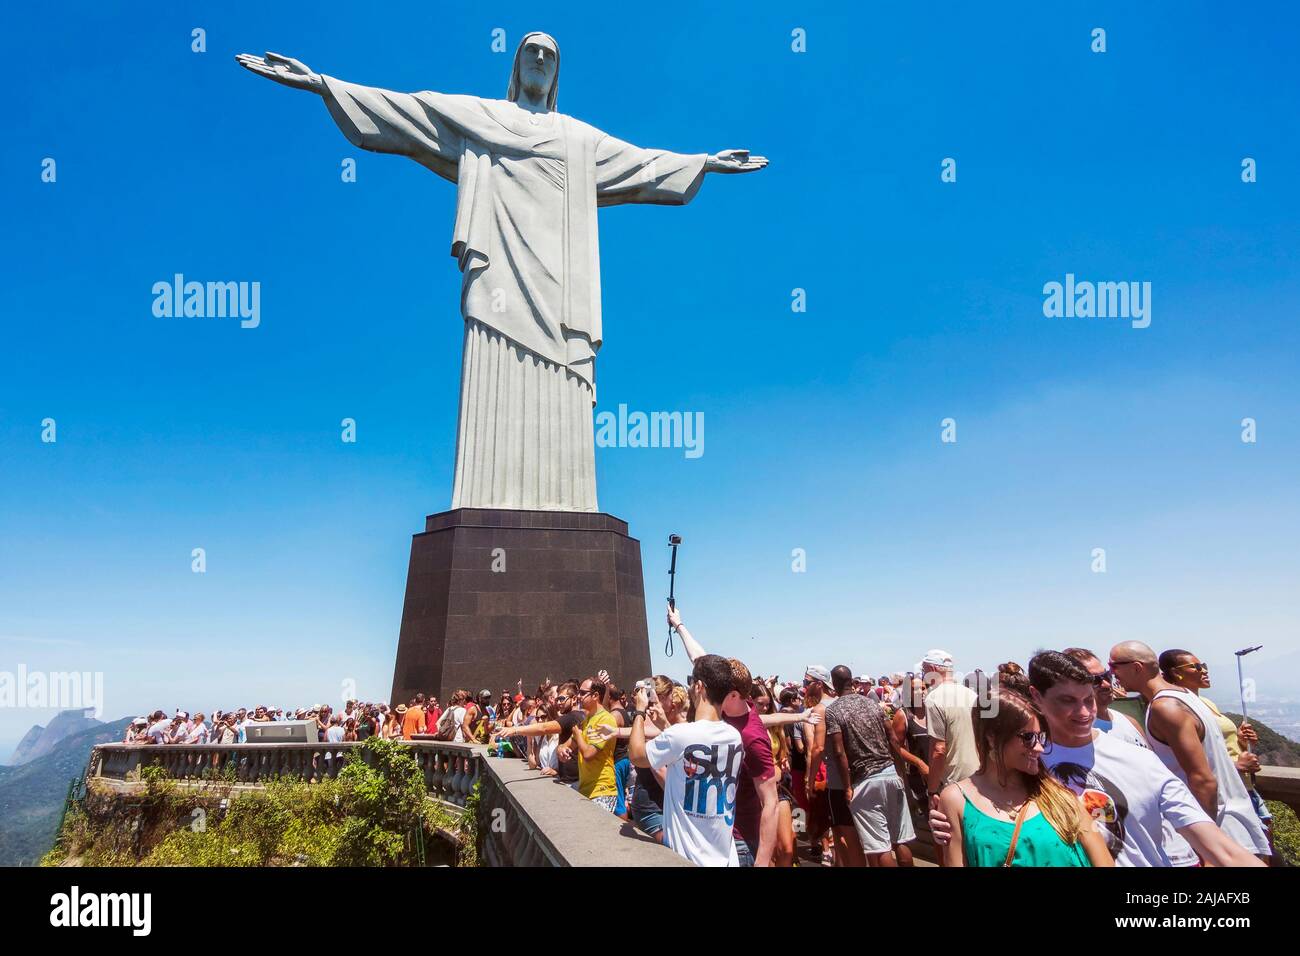 Tourists at the Christ the Redeemer statue atop the Corcovado Mountain in Rio de Janeiro, Brazil. Stock Photo